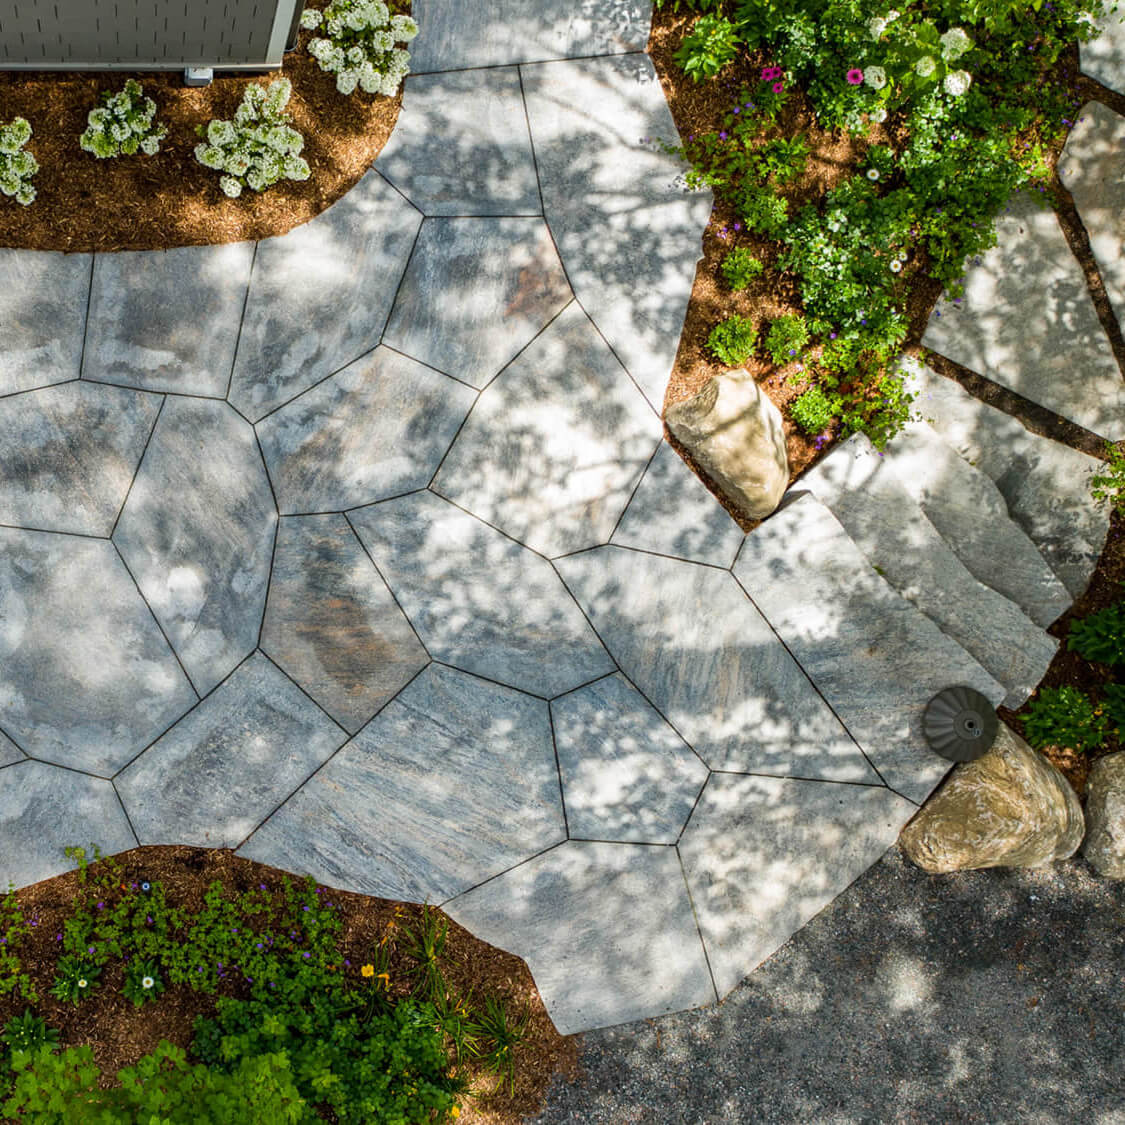 natural stone patio from above